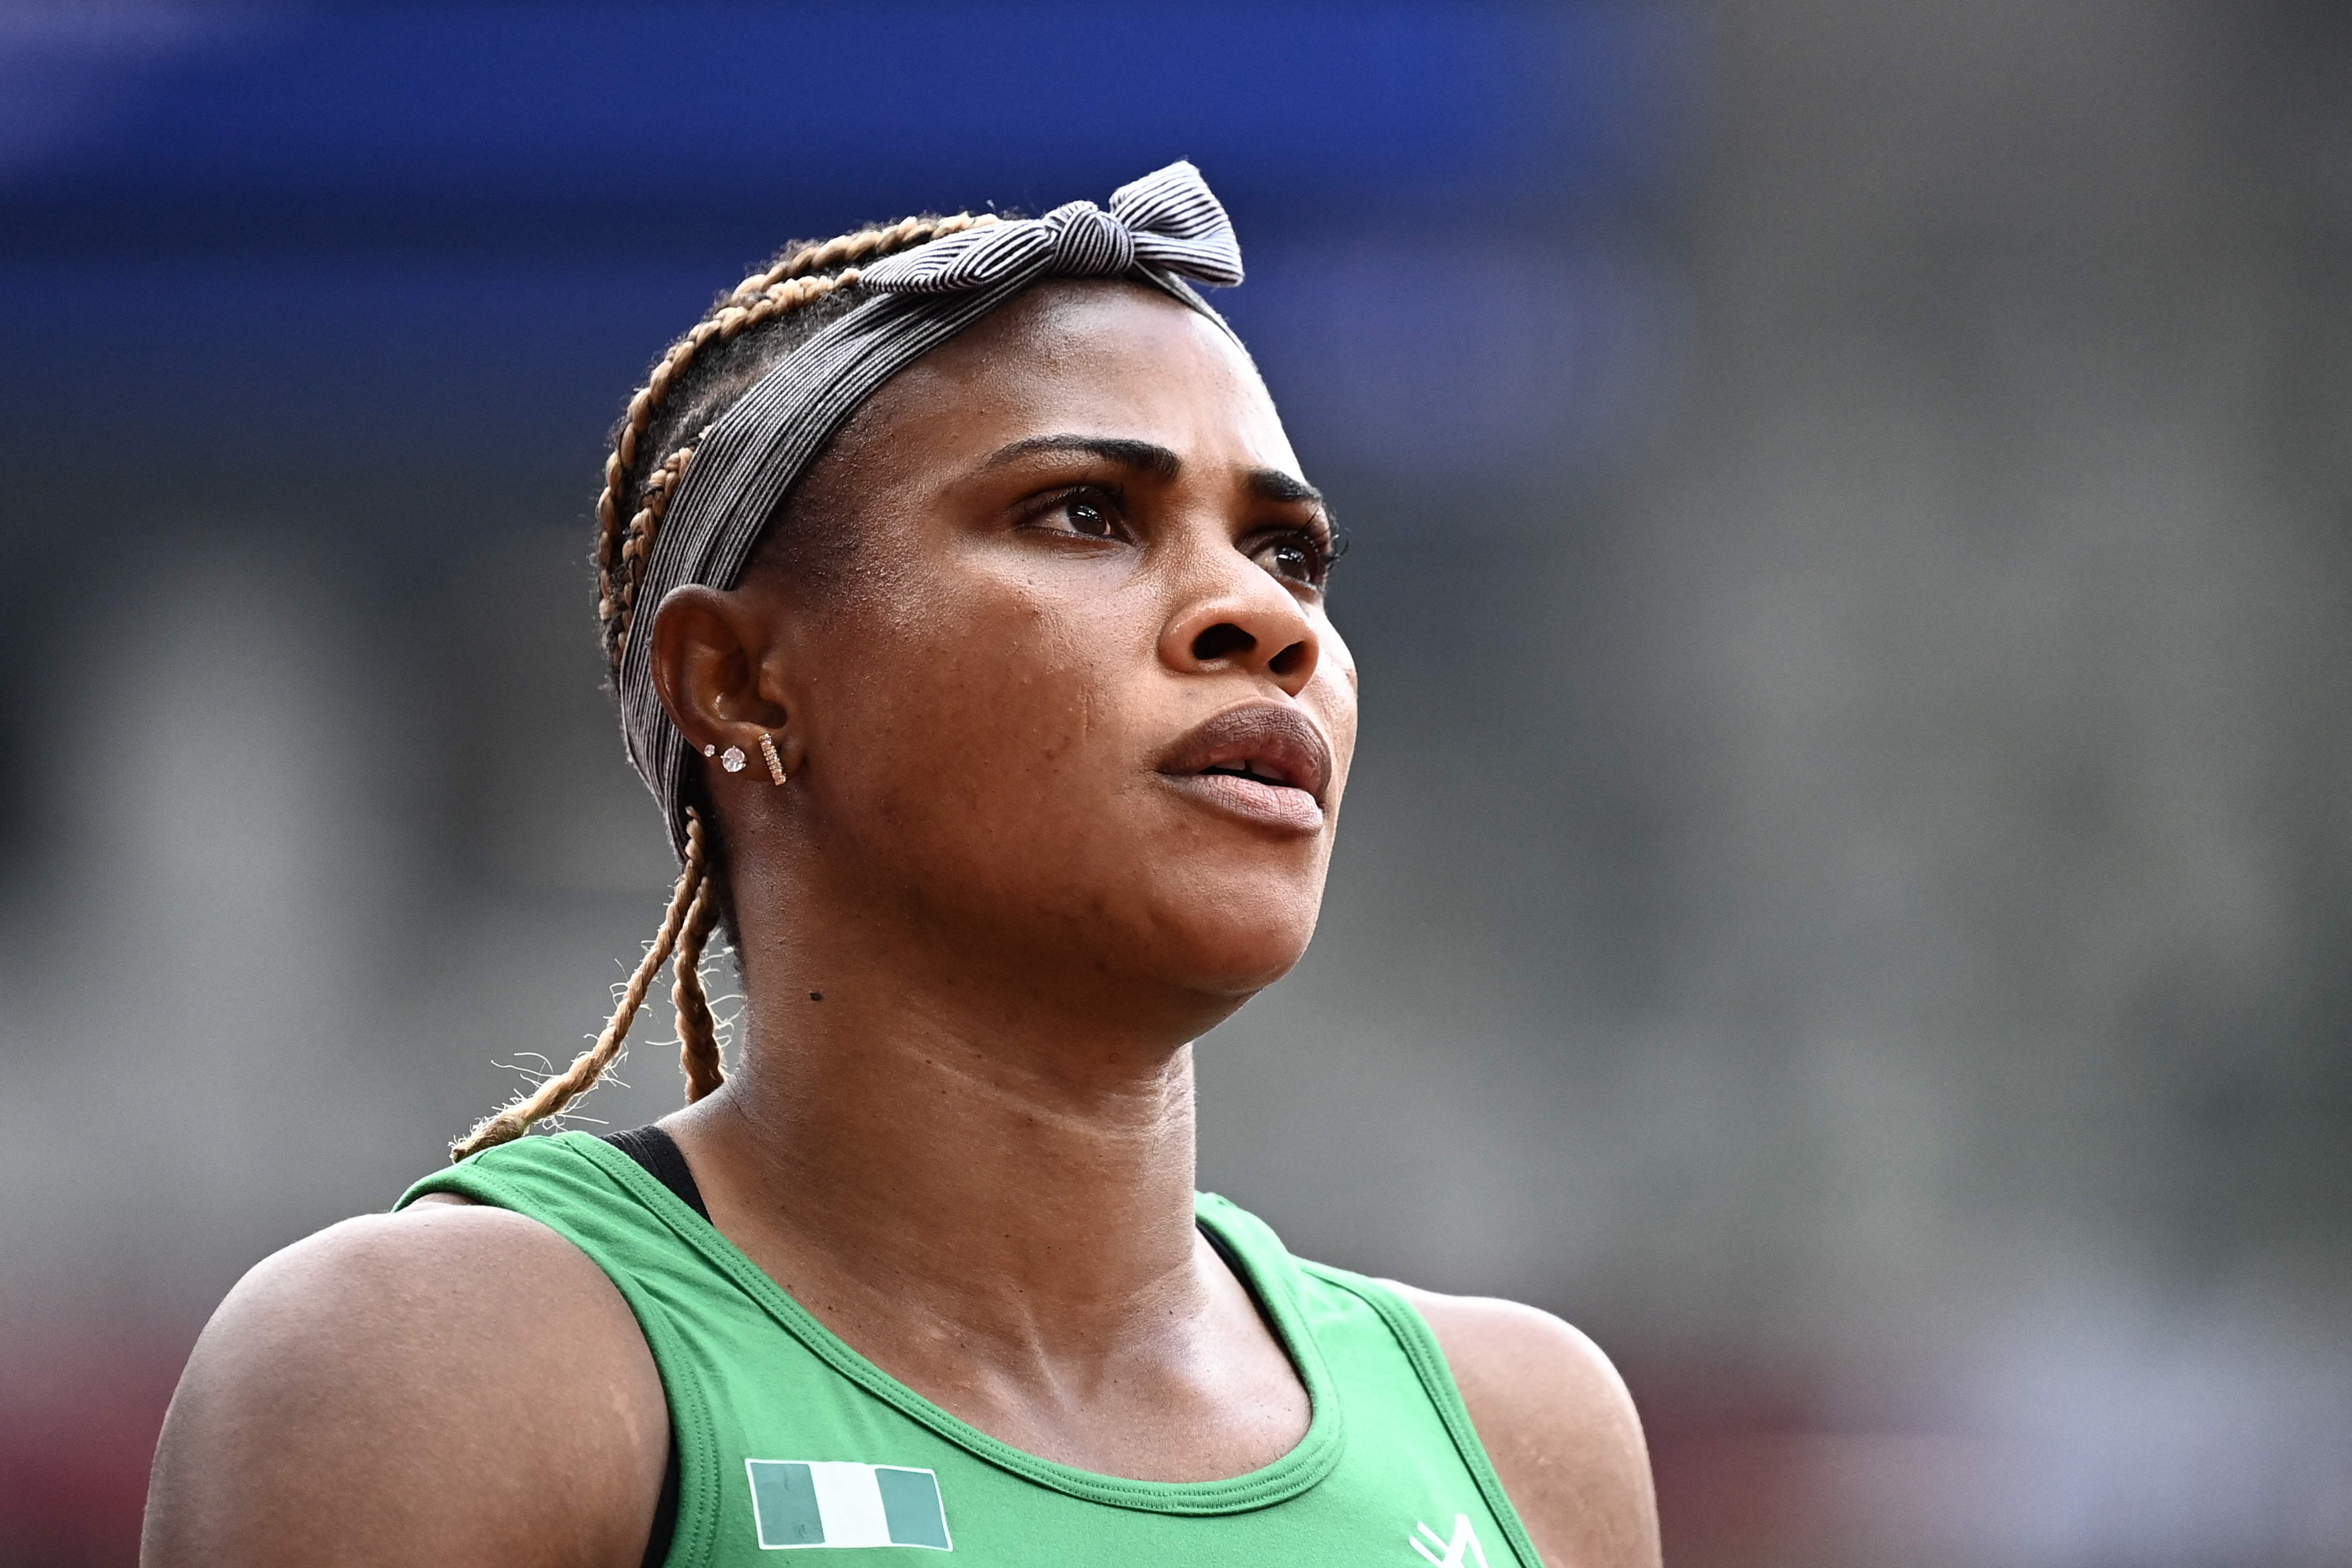 Blessing Okagbare ran during the heats